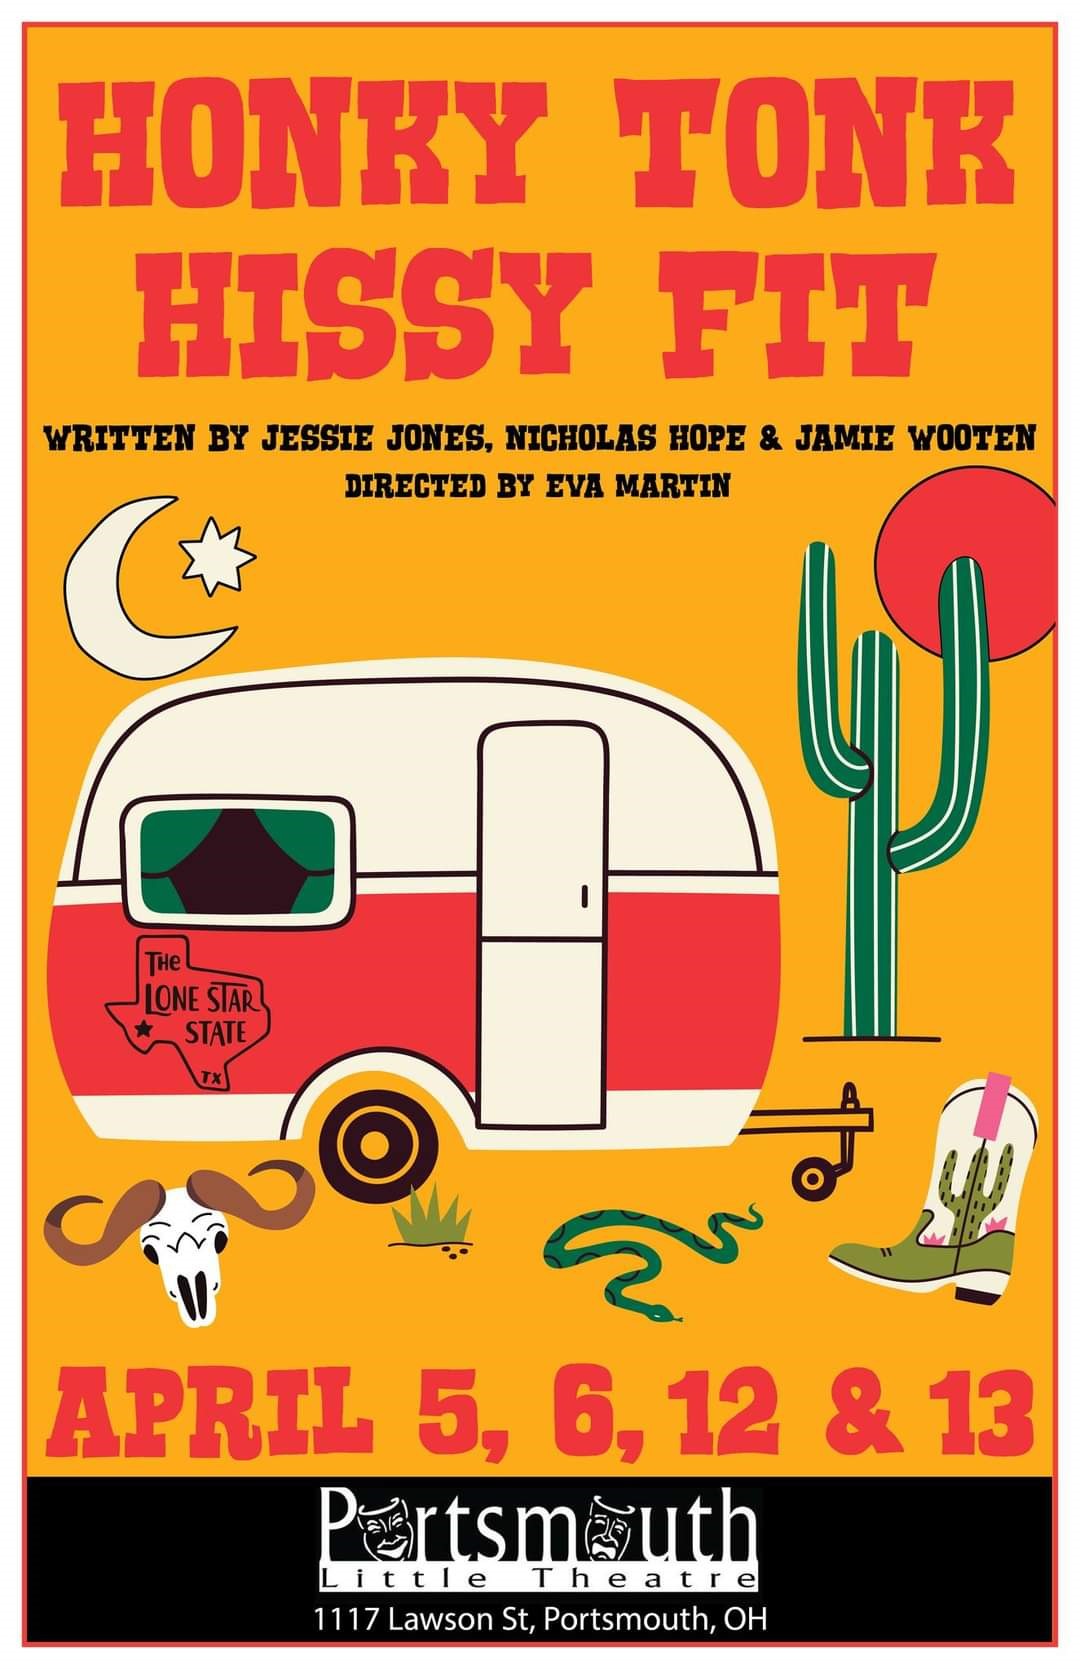 Honky Tonk Hissy Fit  on Apr 13, 19:30@Portsmouth Little Theatre - Pick a seat, Buy tickets and Get information on Portsmouth Little Theatre 